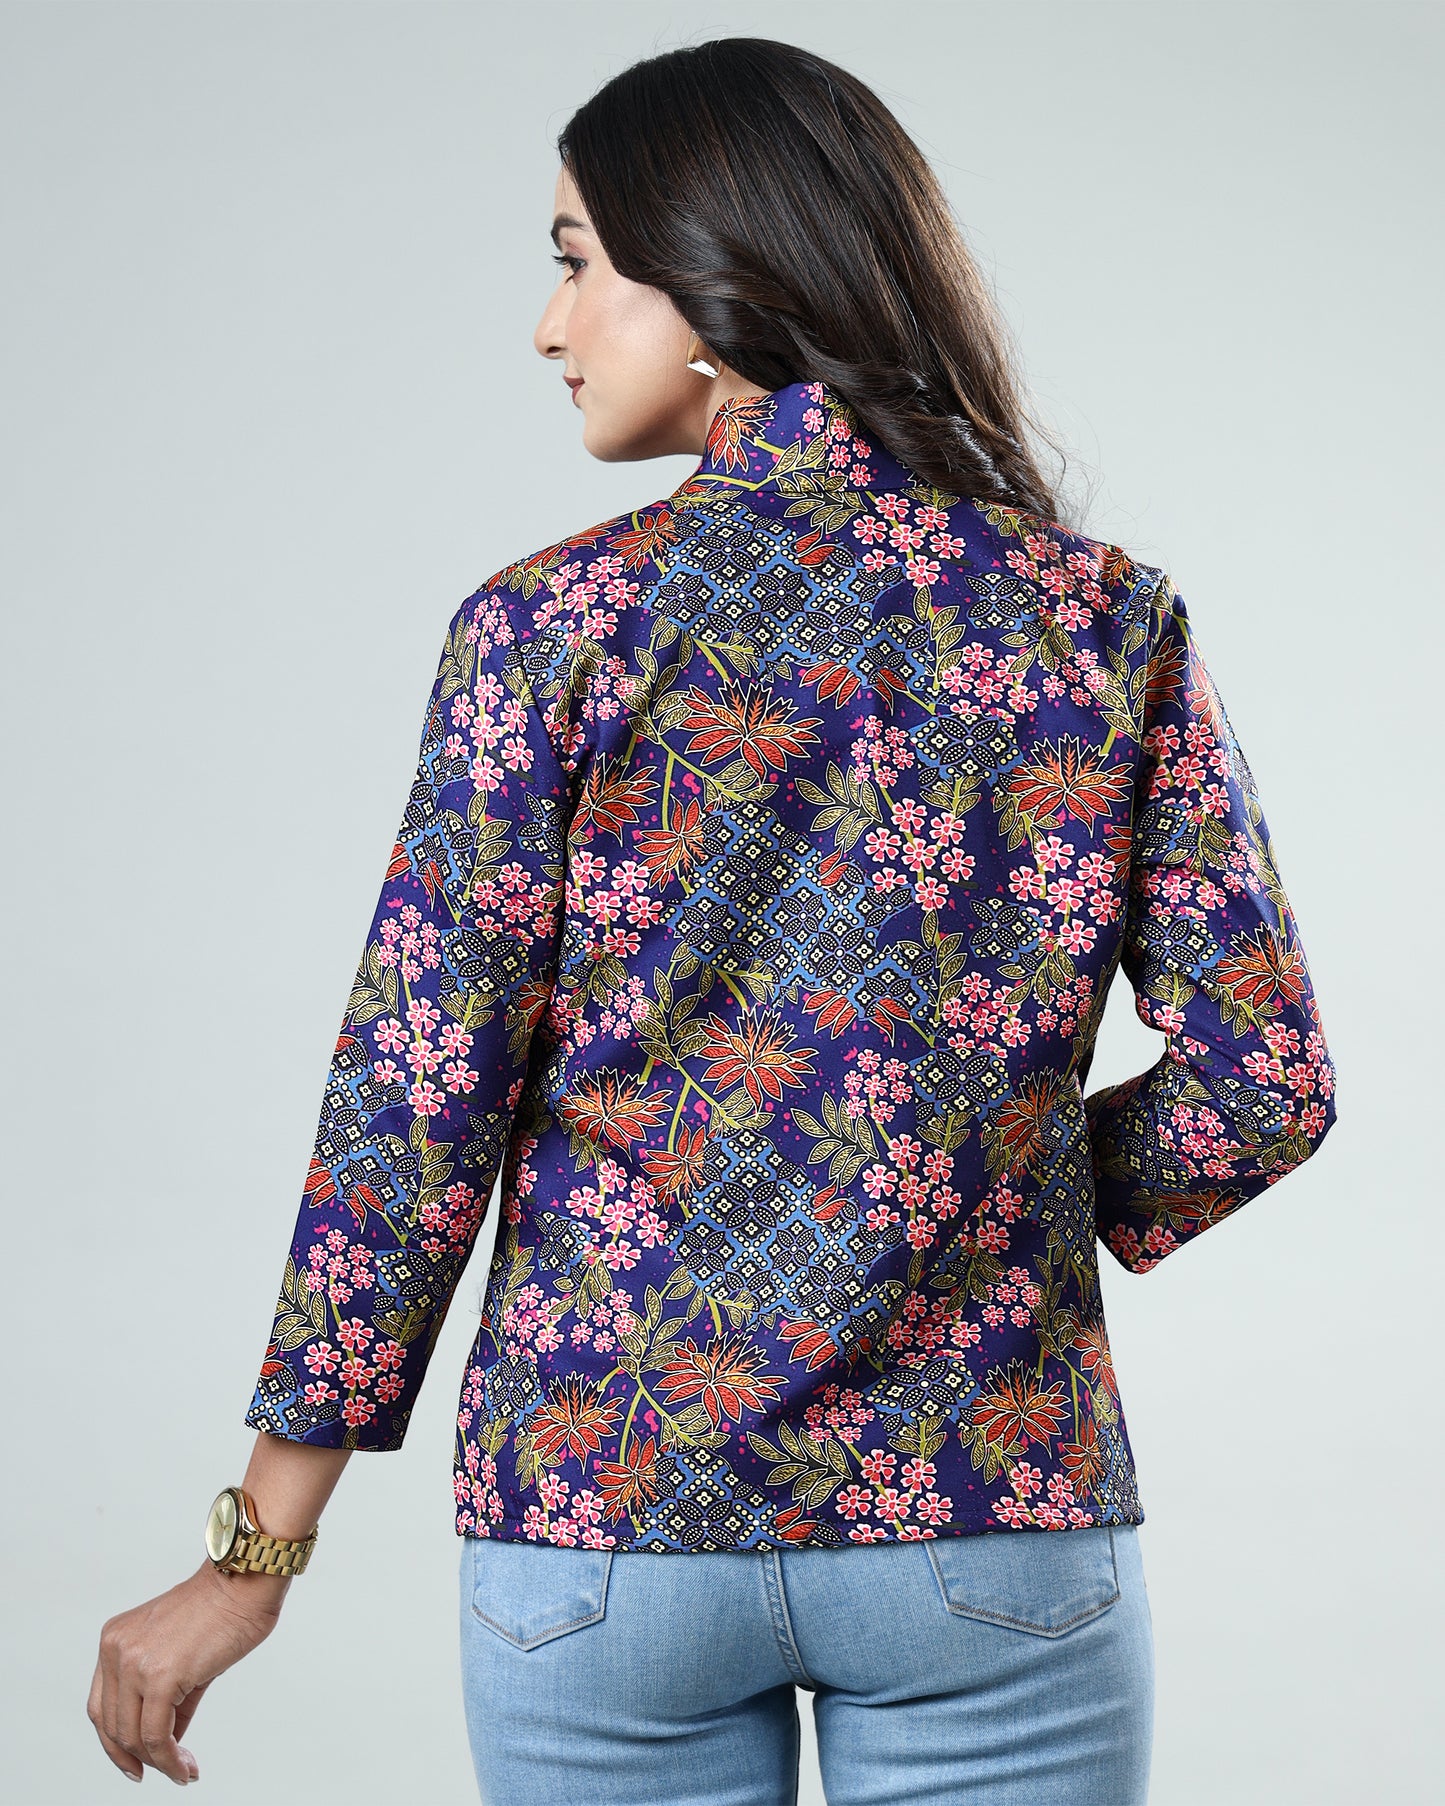 Everyone's Loving It: The Floral Womens Jacket